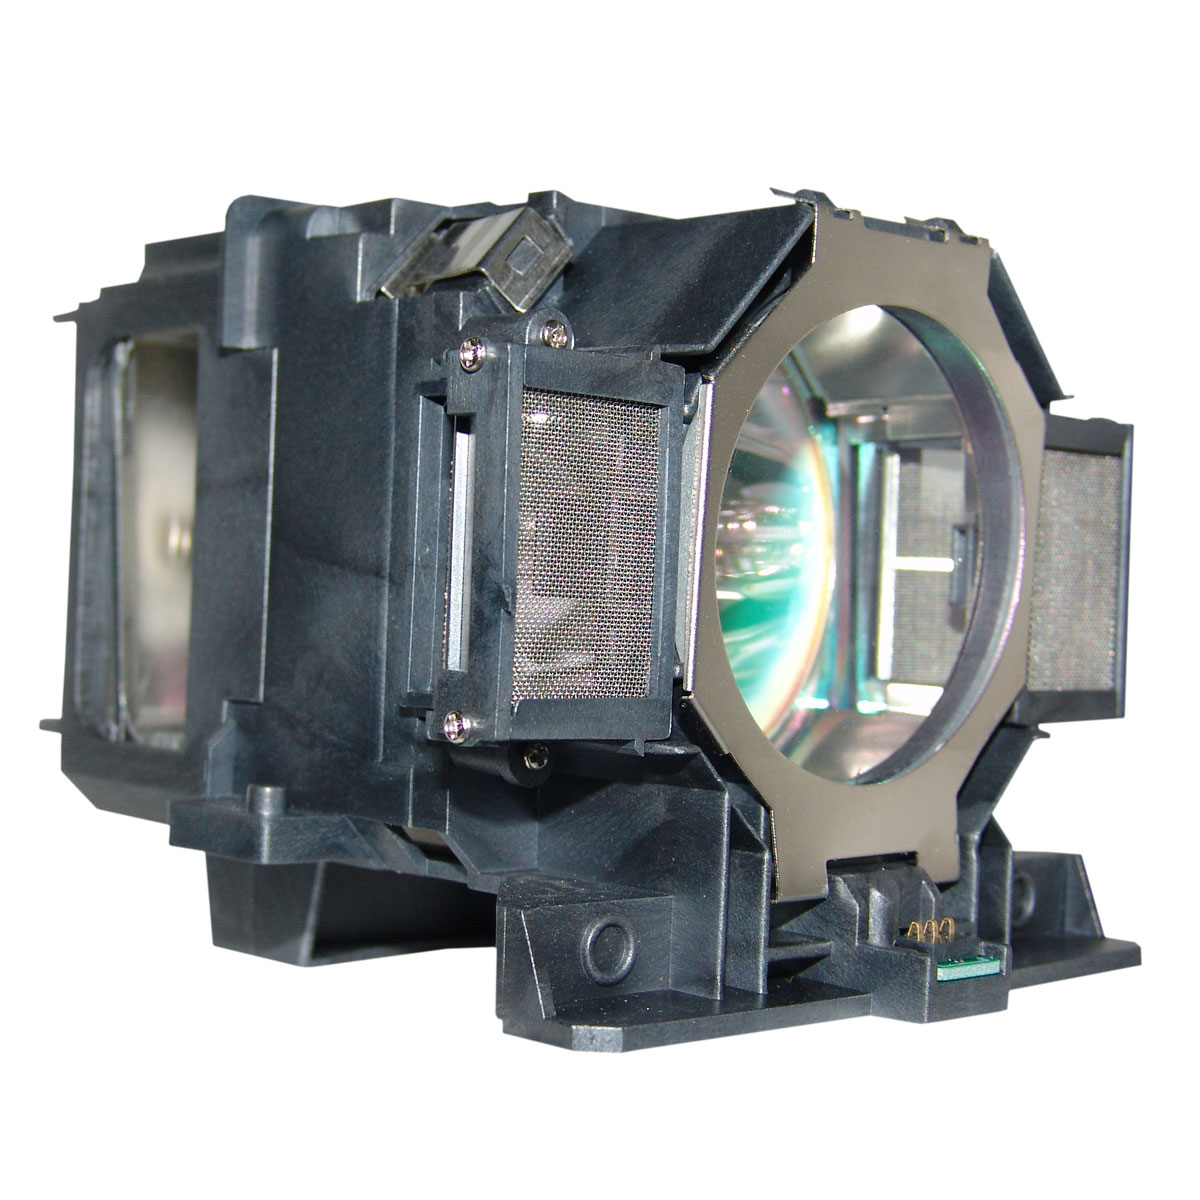 Epson Generic Complete EPSON EB-Z11000W (Dual Lamp) Projector Lamp projector. Includes 1 year warranty.